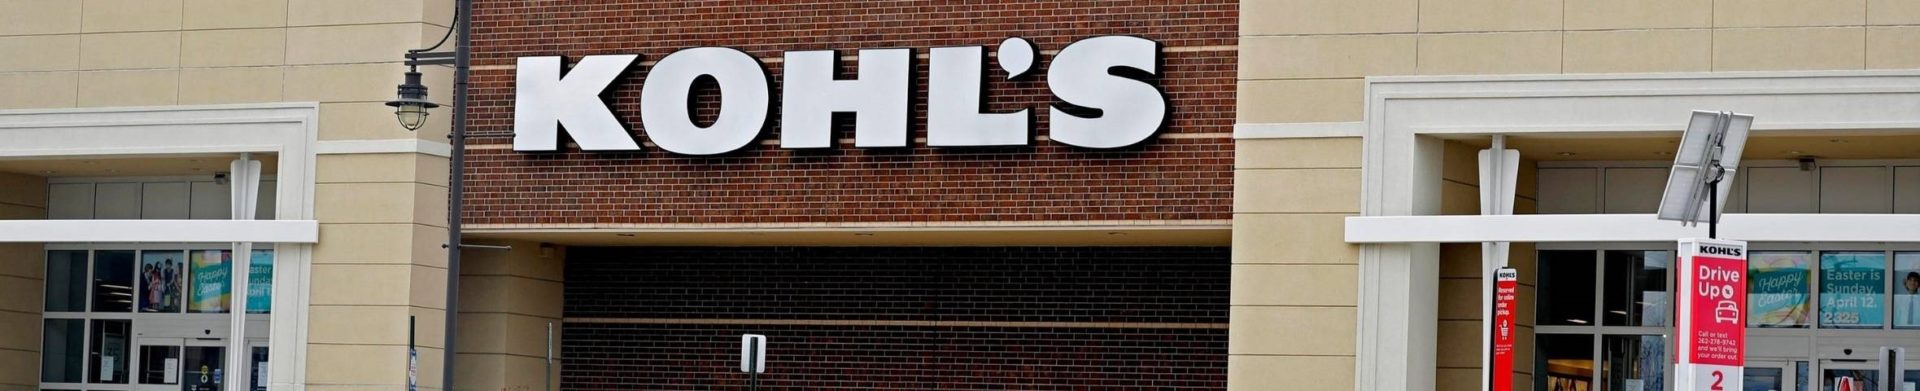 Kohl's storefront in the daytime